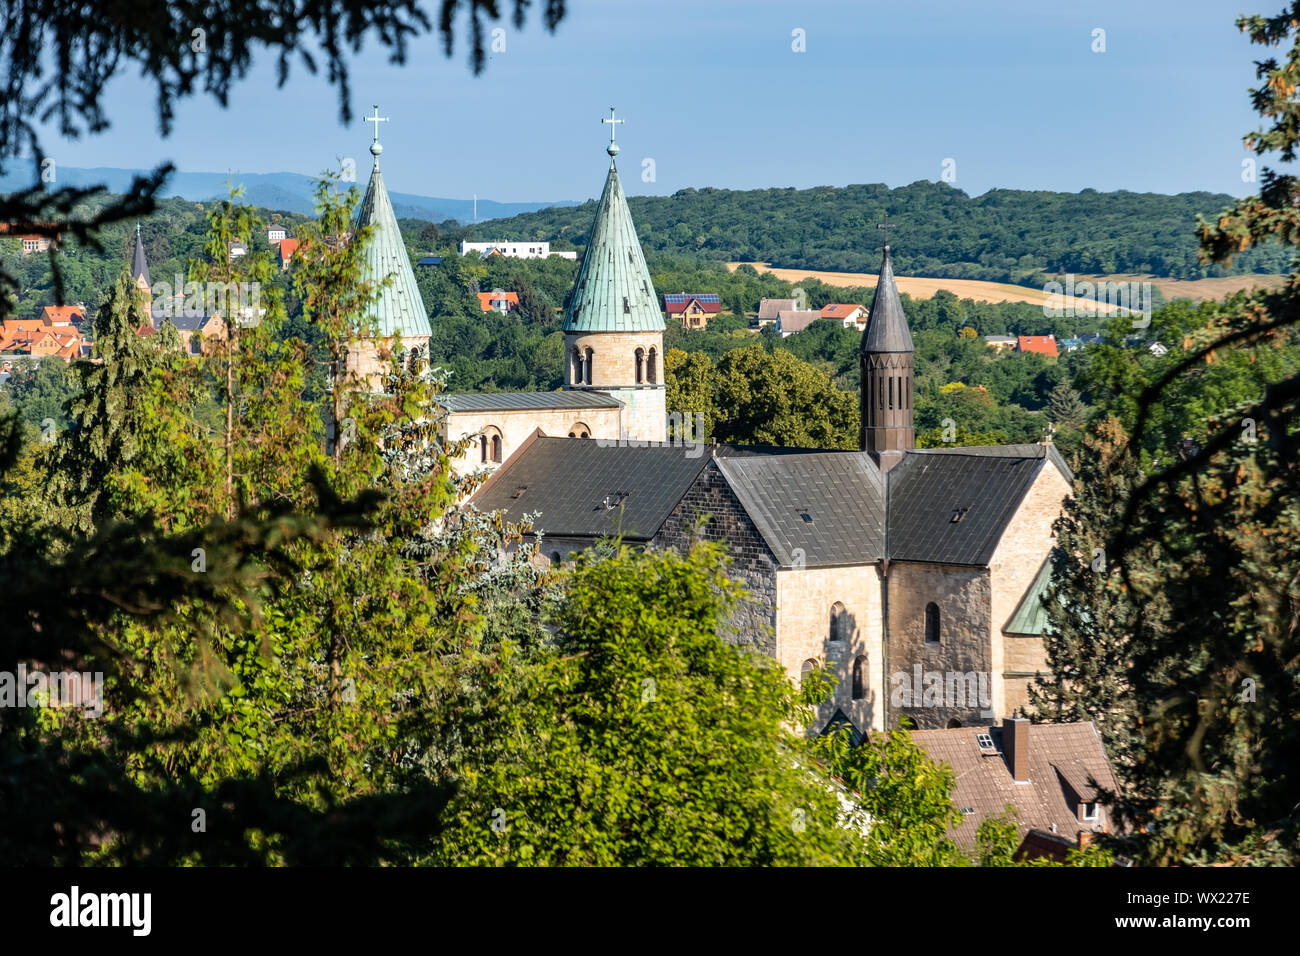 Pictures from Gernrode in the Harz Mountains Stiftskirche St. Cyriakus Stock Photo